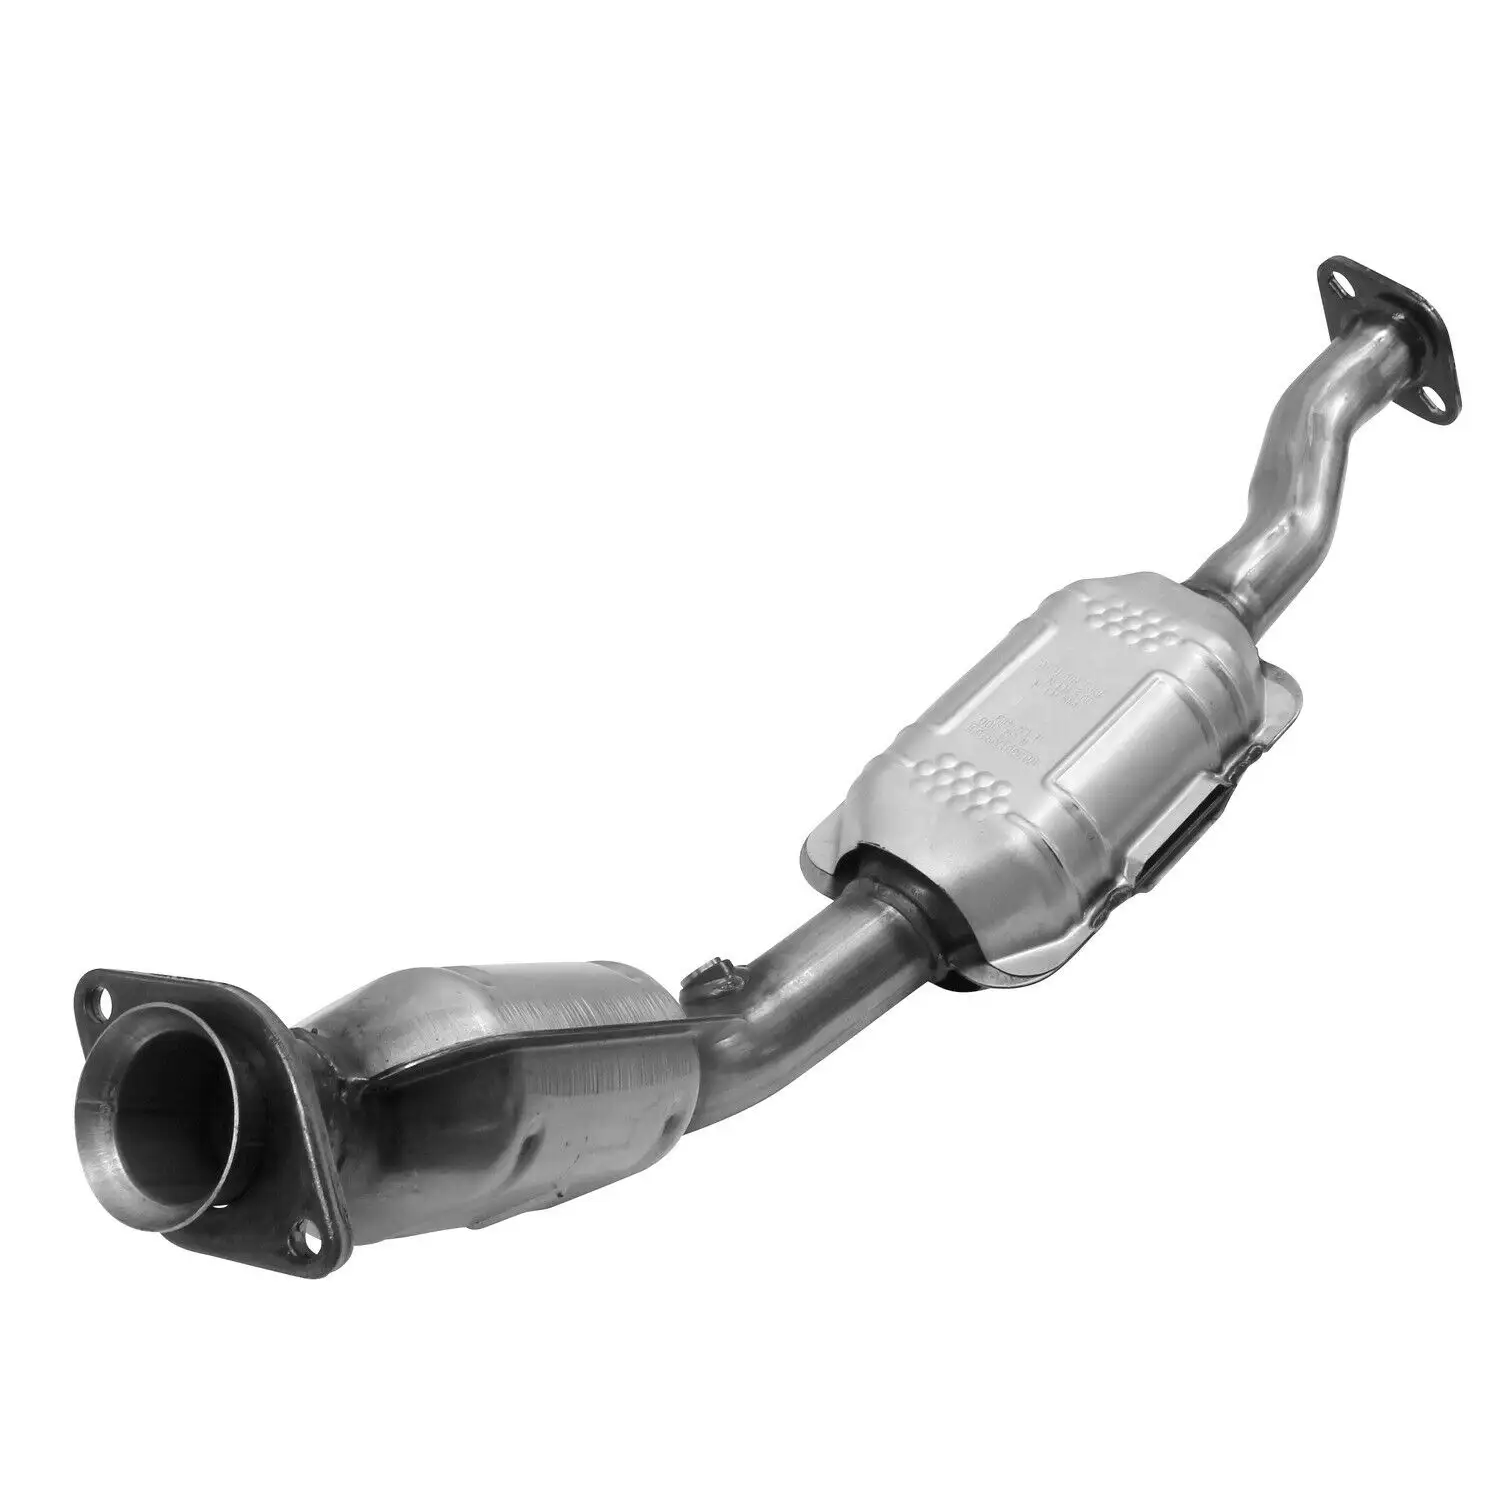 Catalytic converter left and right kit for: 2002-2011 Ford Mercury Lincoln 4.6L Catalytic converter